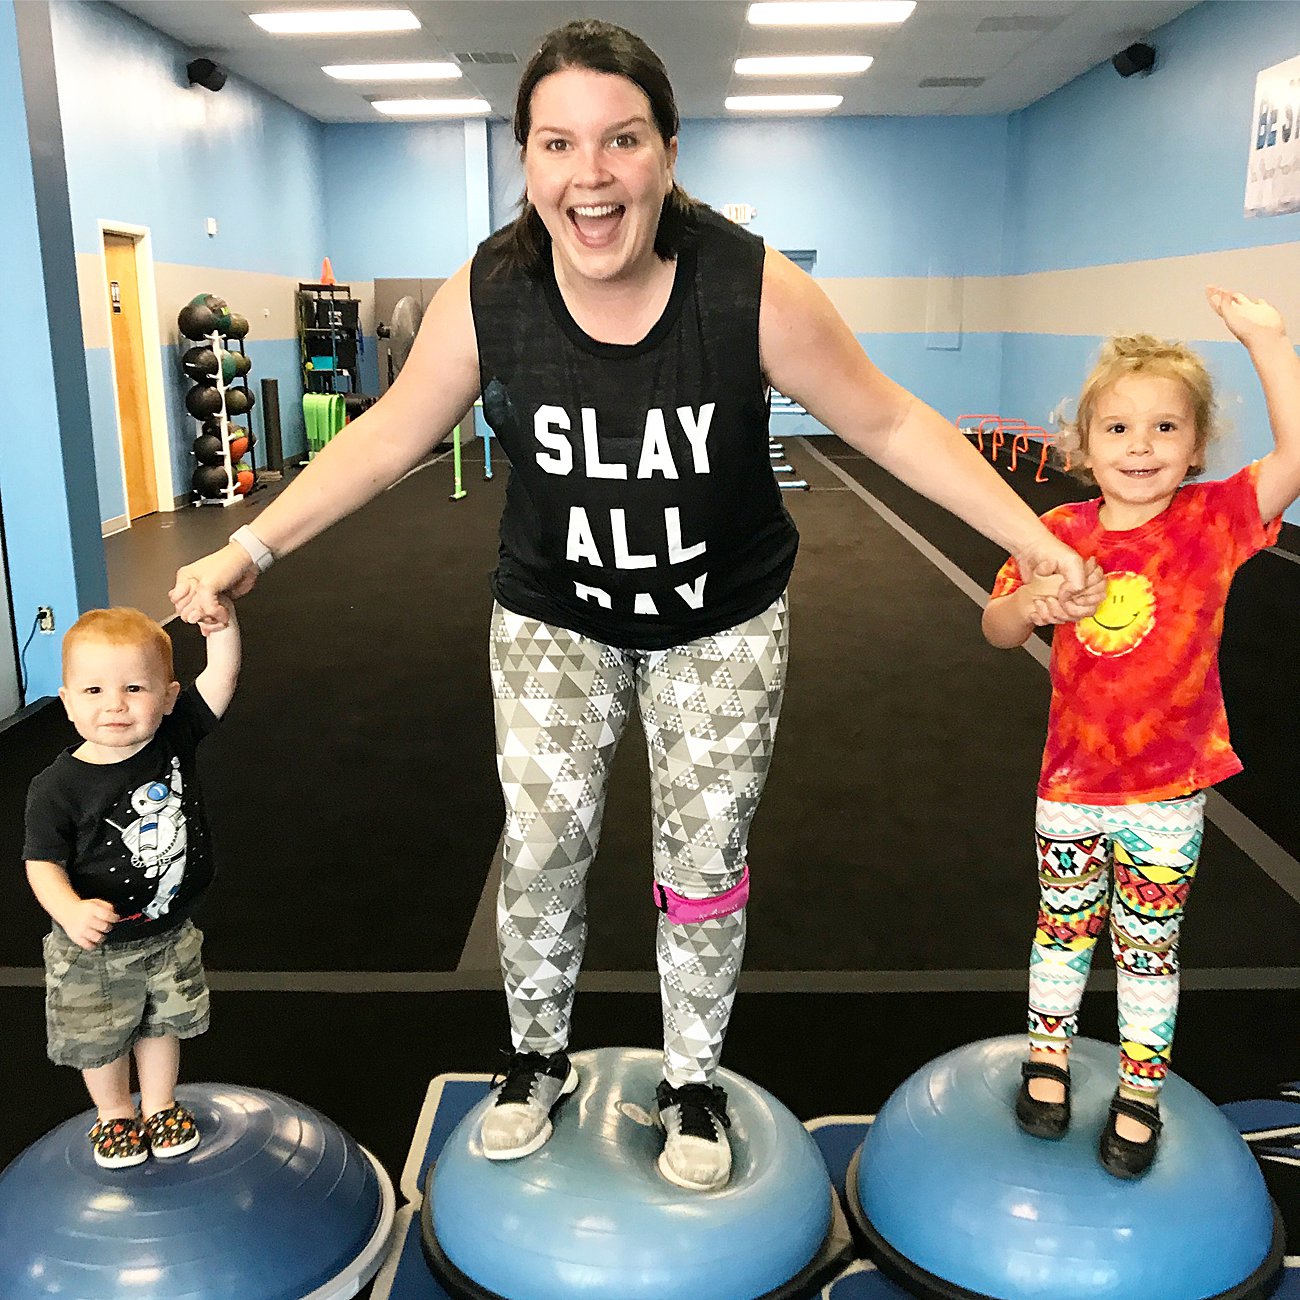 Burn Bootcamp Review - Fitness Update (7) - My Fitness Journey - When the Going Gets Tough by popular North Carolina blogger Still Being Molly